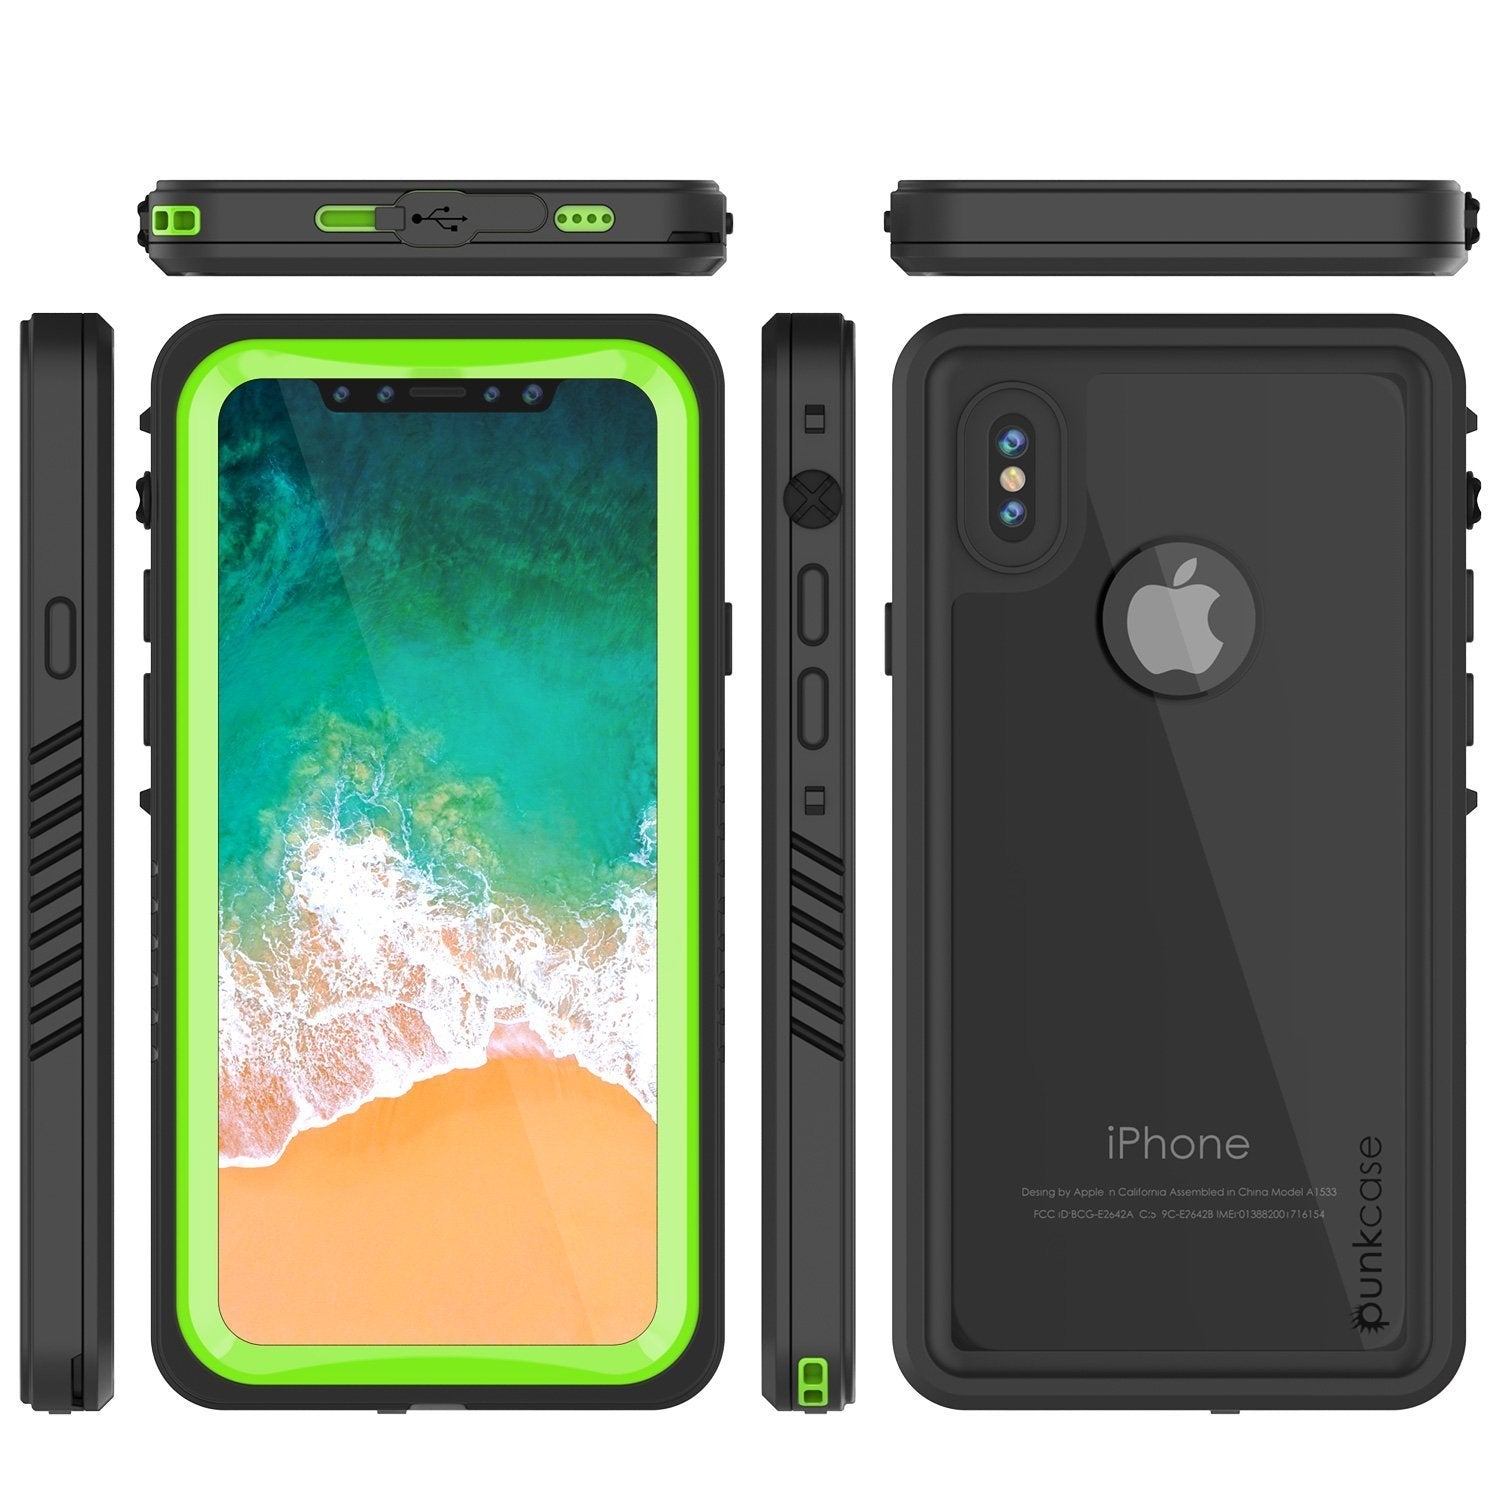 iPhone XS Max Waterproof Case, Punkcase [Extreme Series] Armor Cover W/ Built In Screen Protector [Light Green]